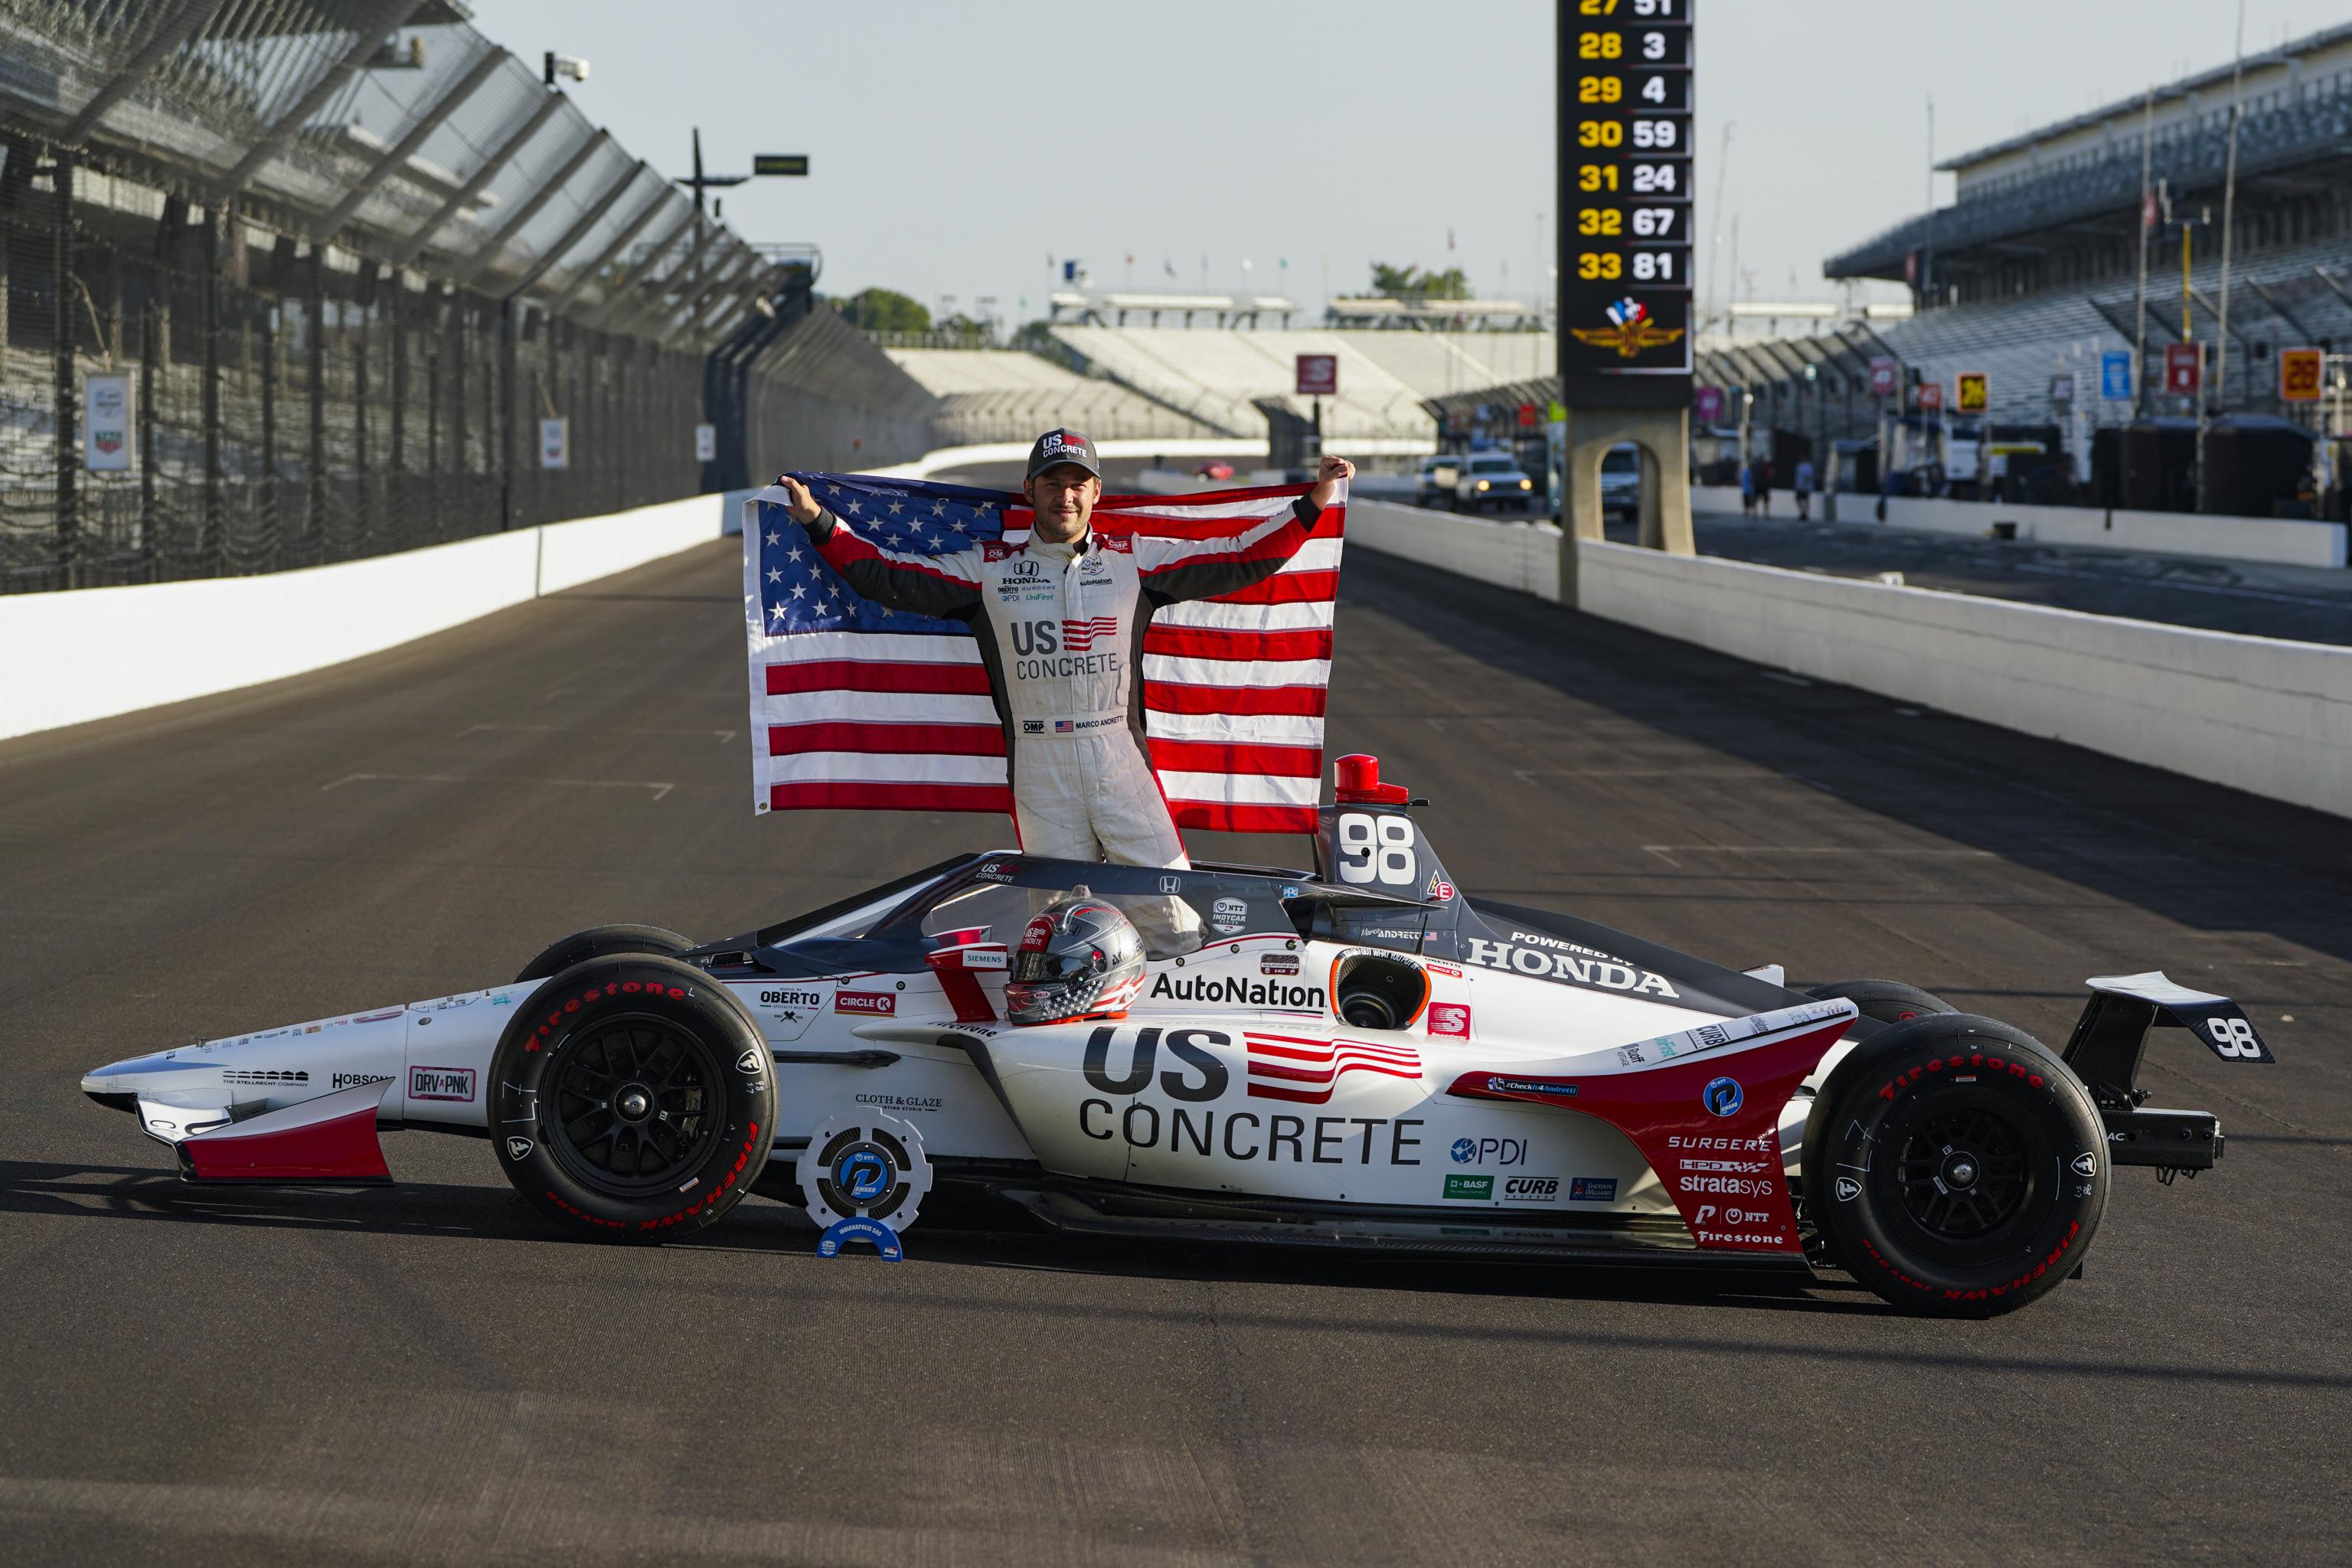 Indy 500 Live Stream 2020 Viewing Info for Race at Indianapolis Motor